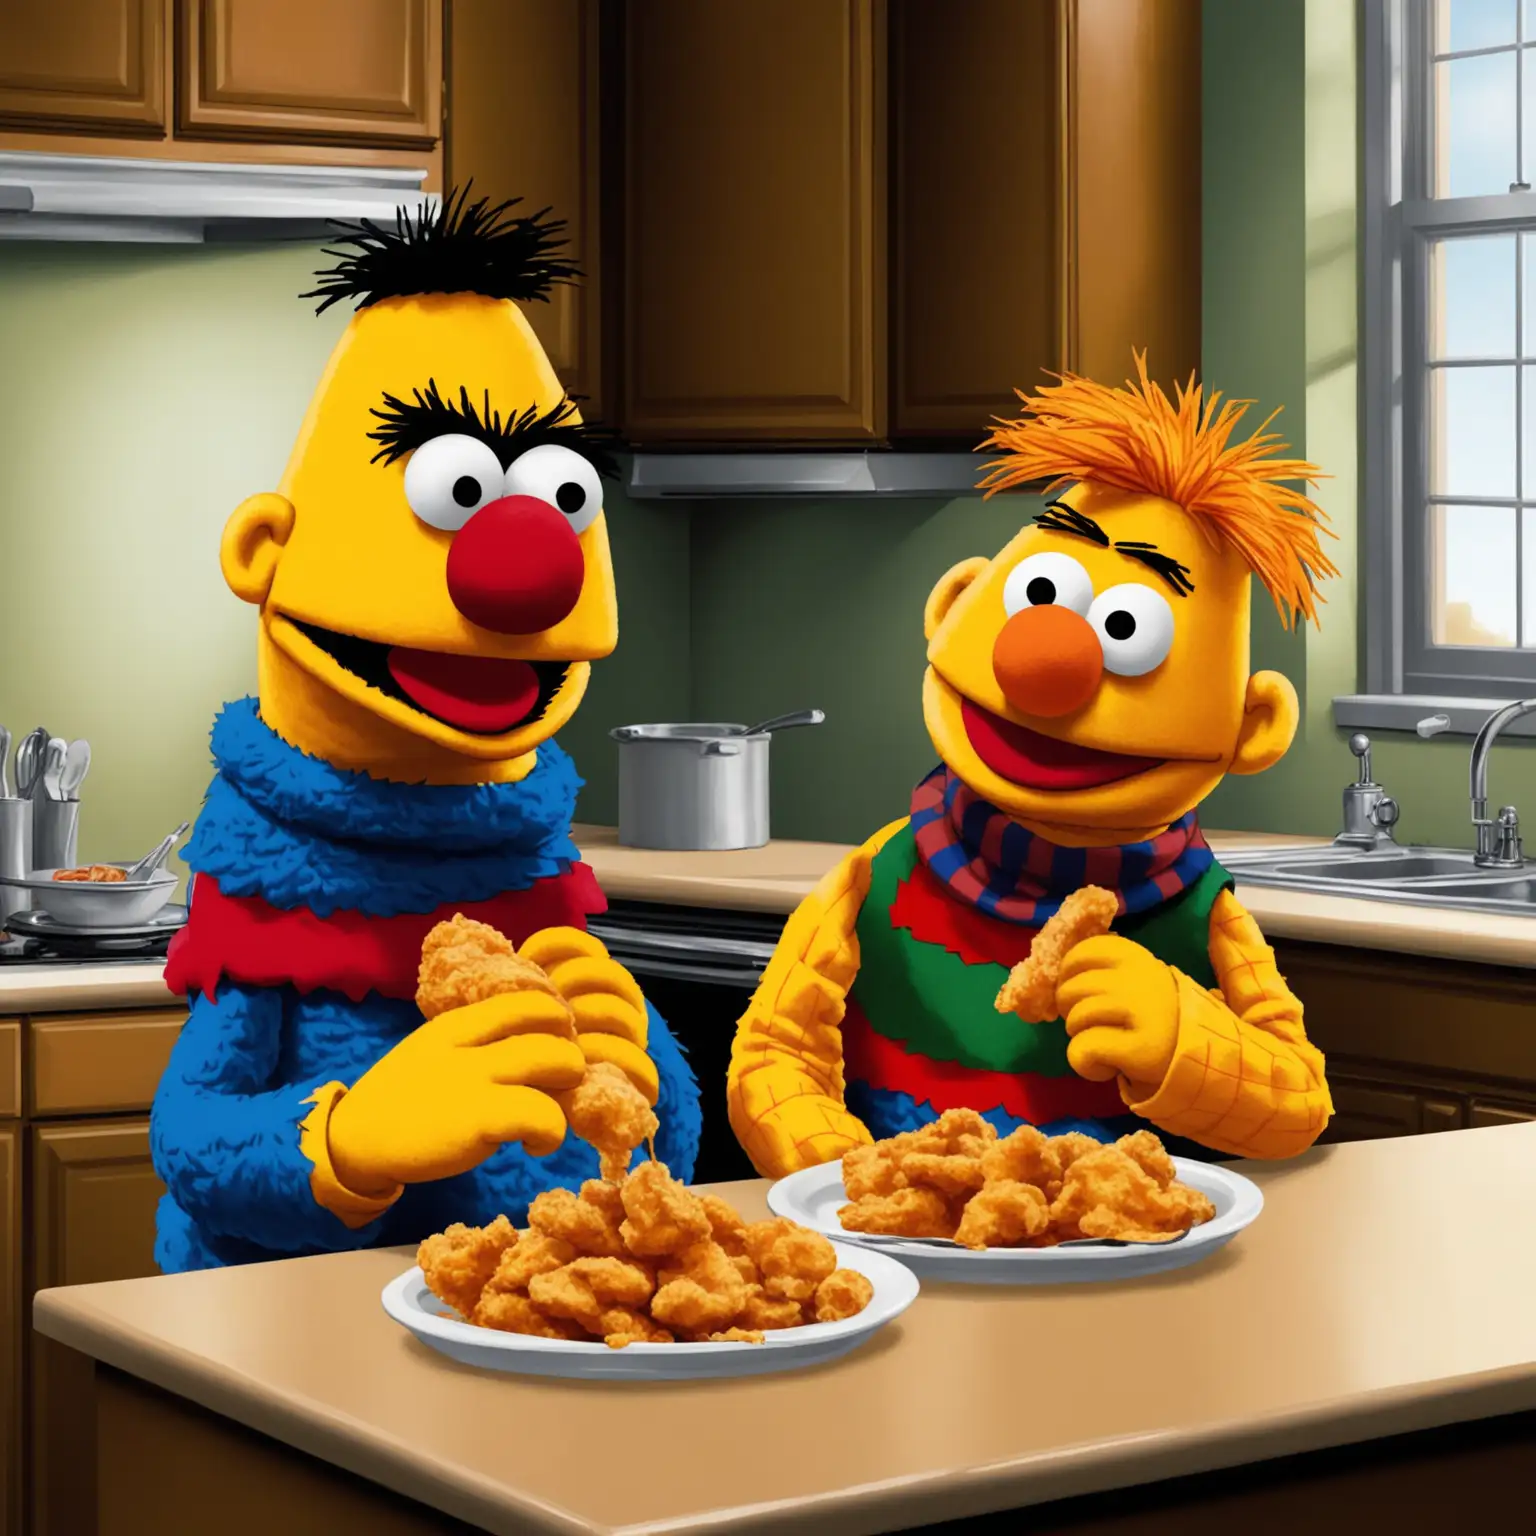 Bert and Ernie Enjoying a Delicious Fried Breakfast in the Cozy Kitchen